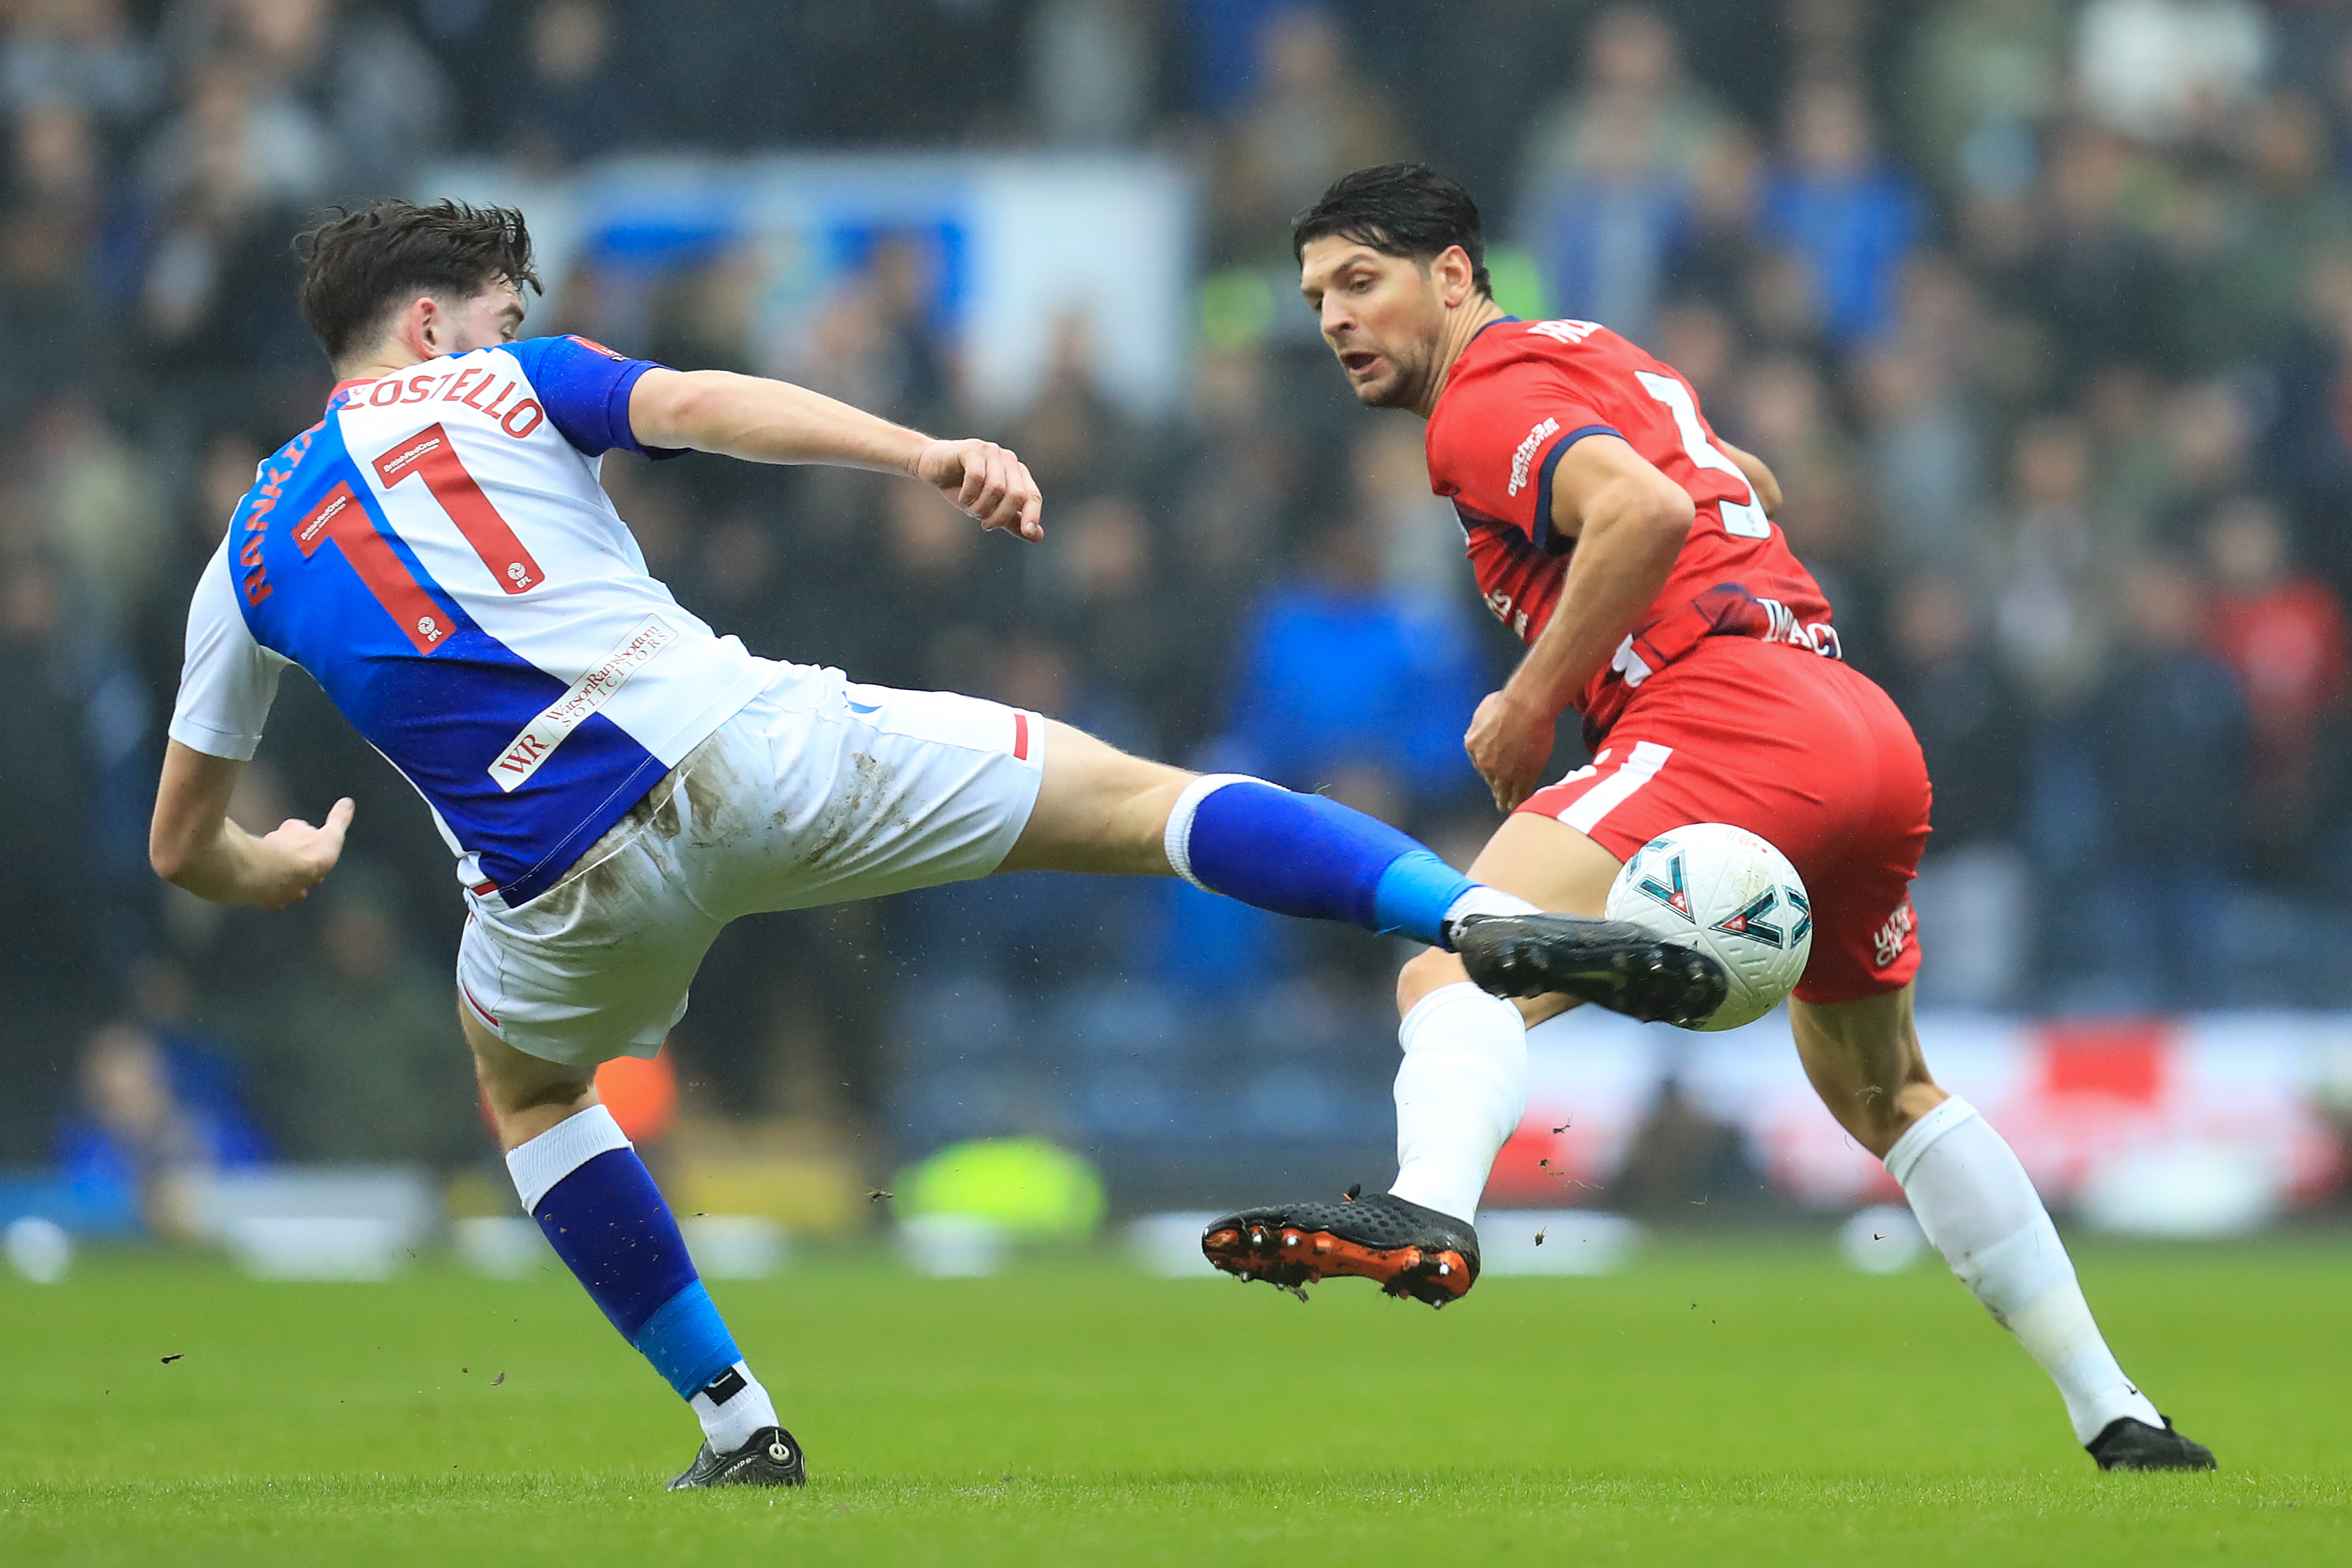 Birmingham City v Blackburn Rovers live stream, match preview, team news and kick-off time for this FA Cup match FourFourTwo